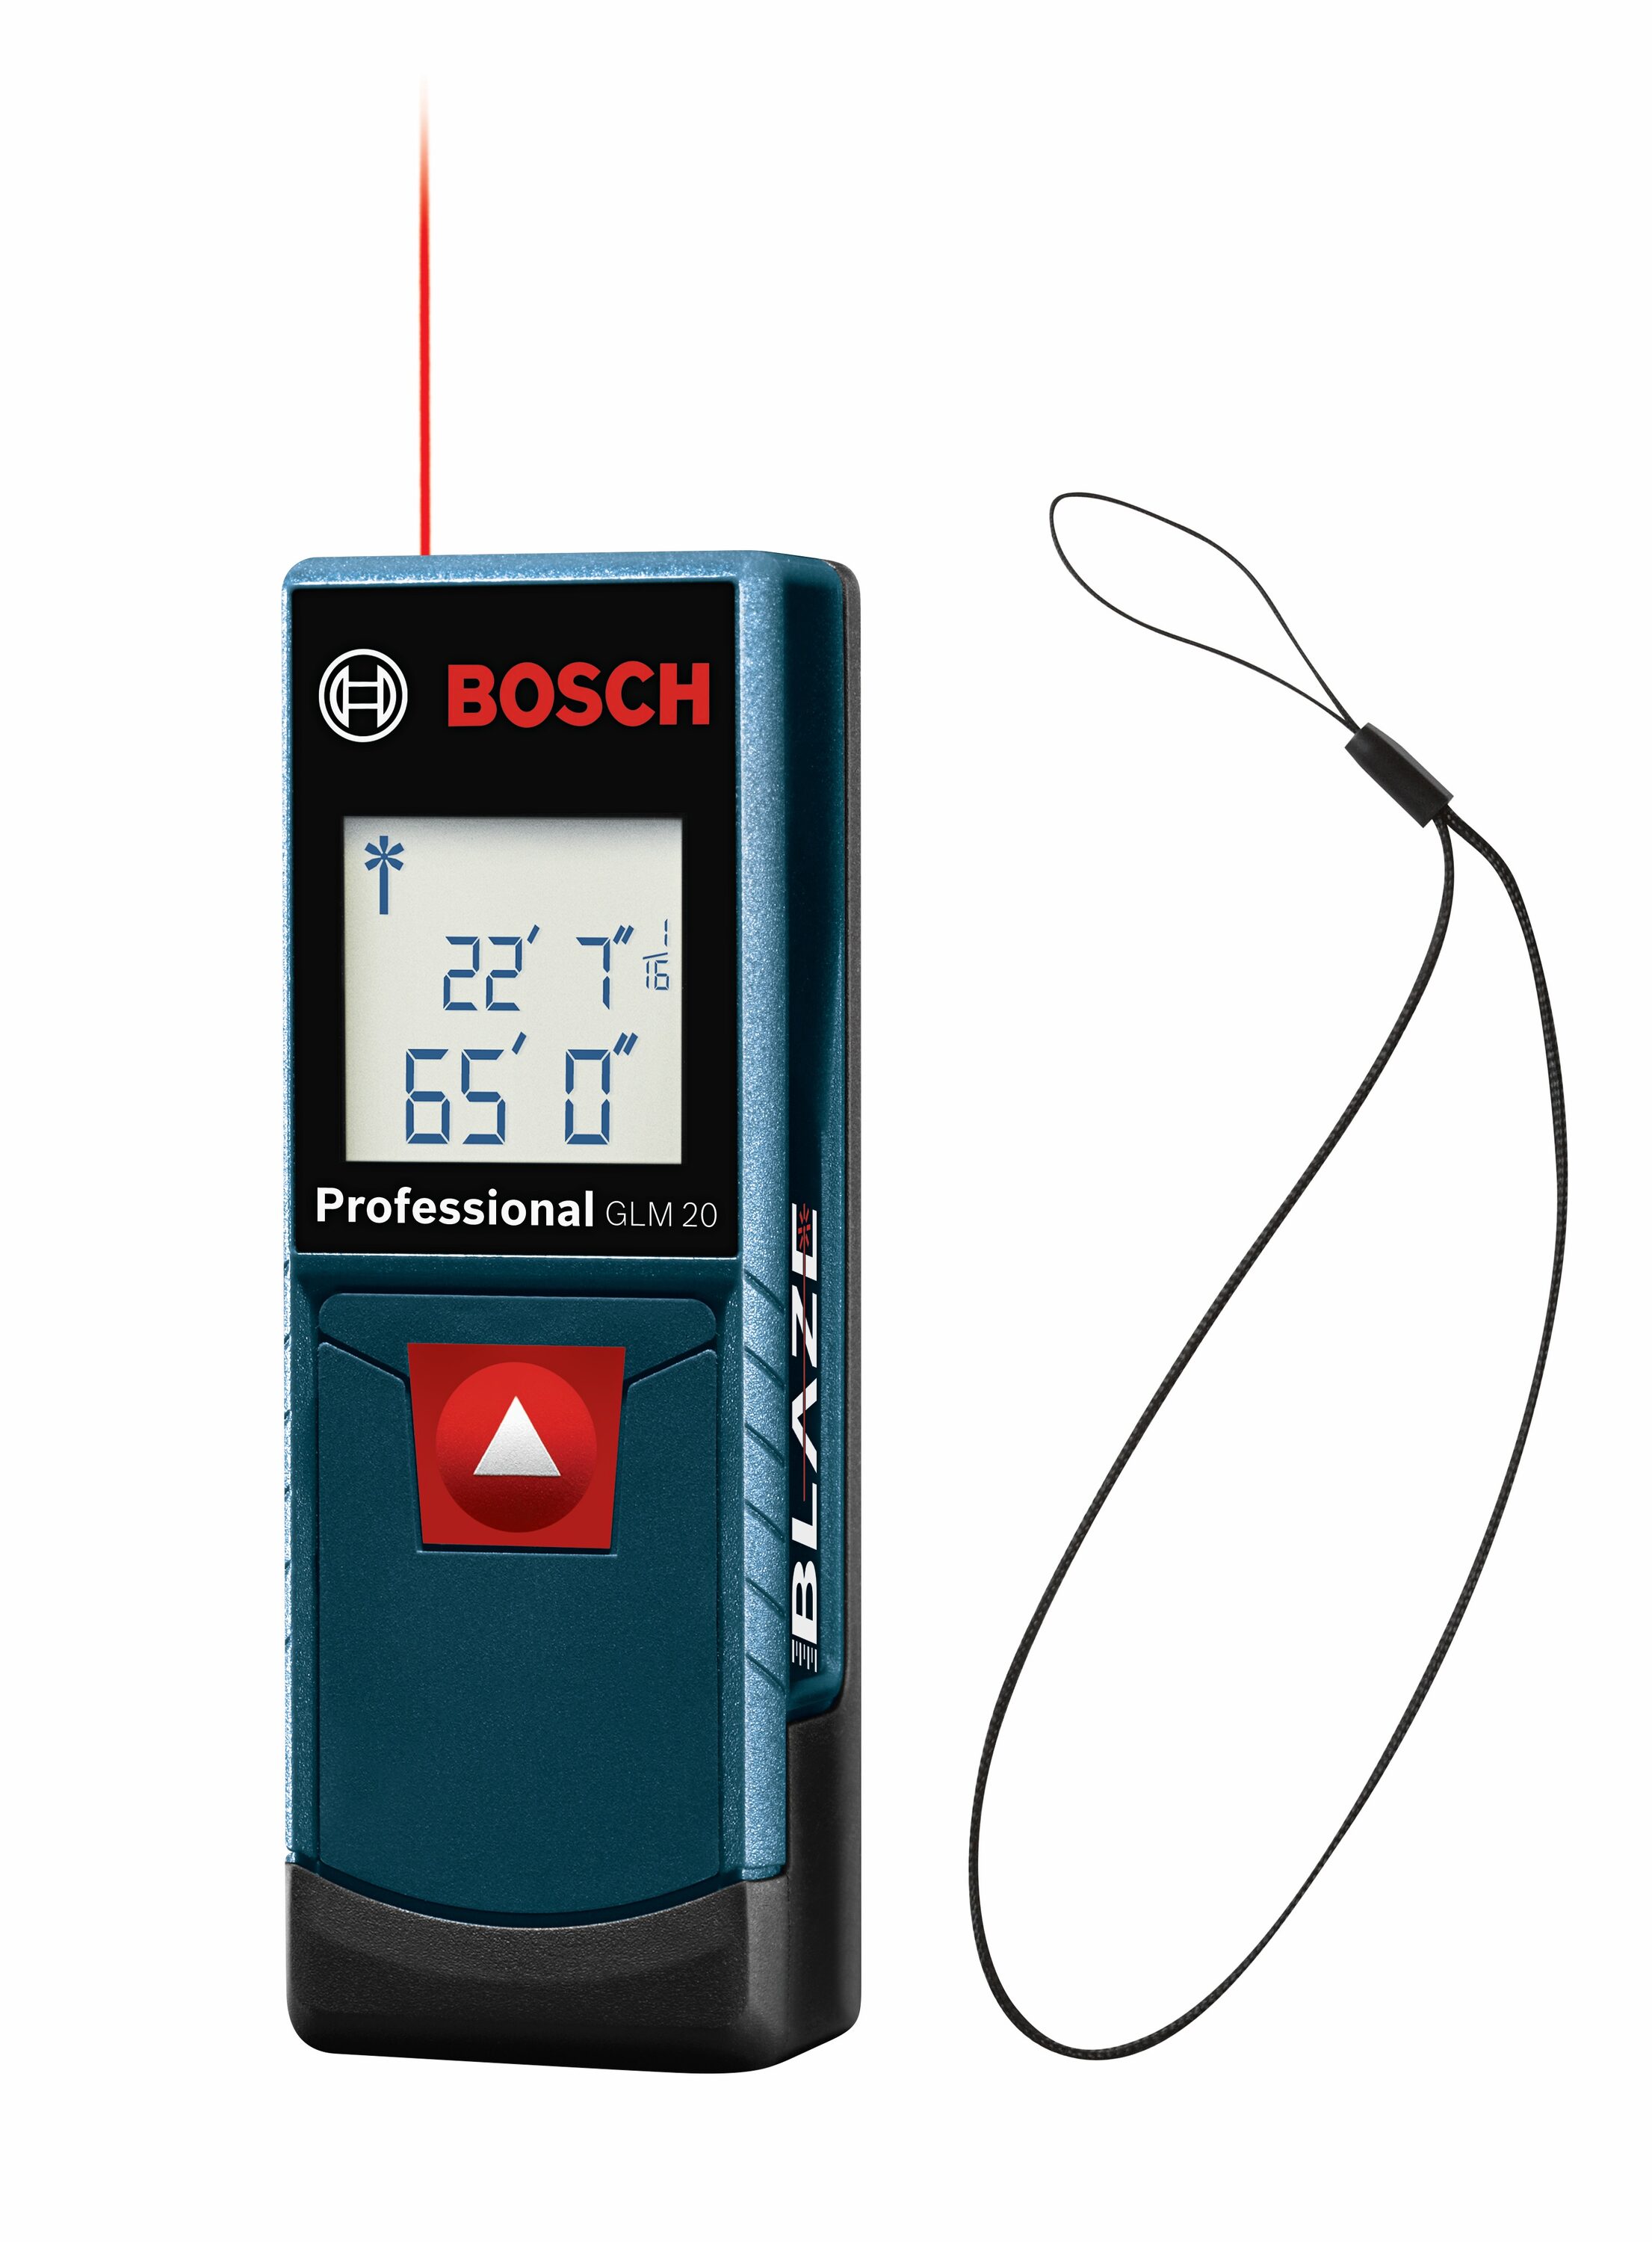 Bosch Professional GLM 20 Distance Measuring Tool, Pre Owned